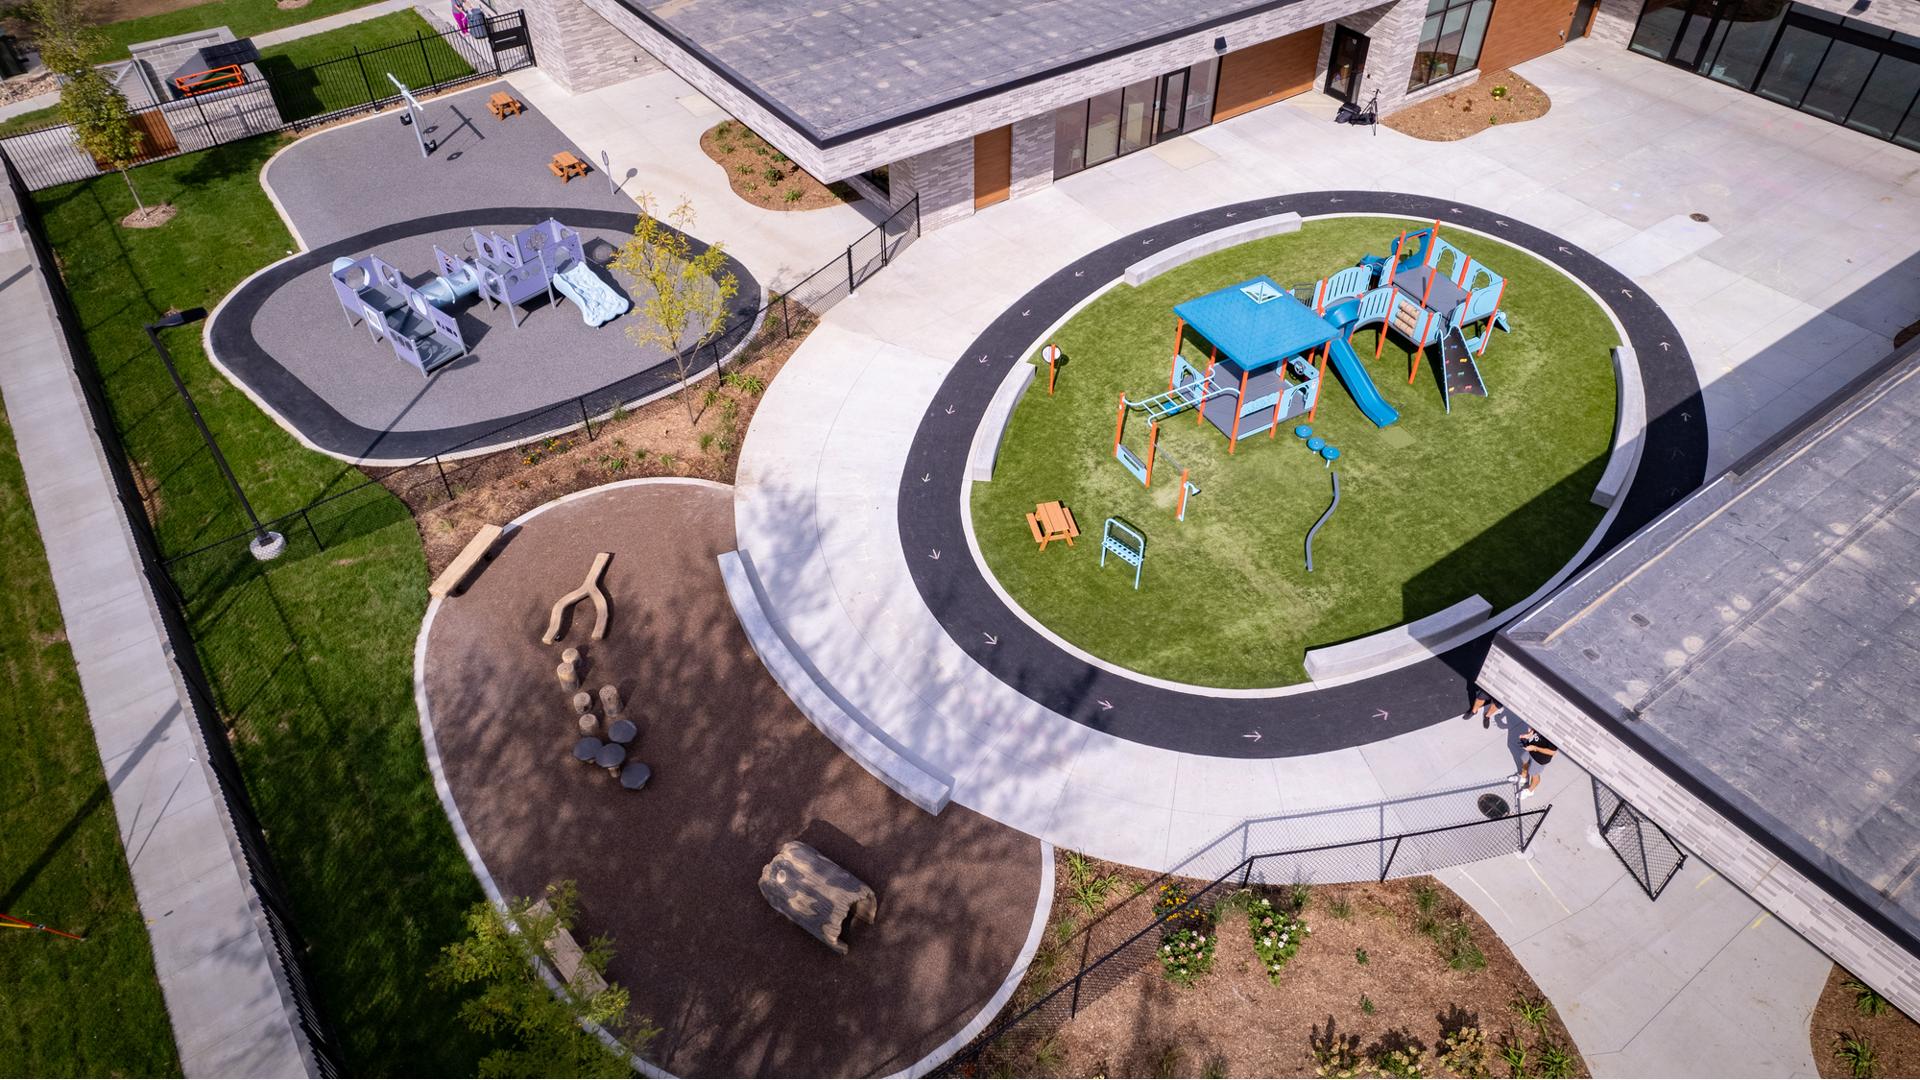 Elevated view of a school building with two separate circular play areas with one structure for toddlers while the other is for a bit older children.